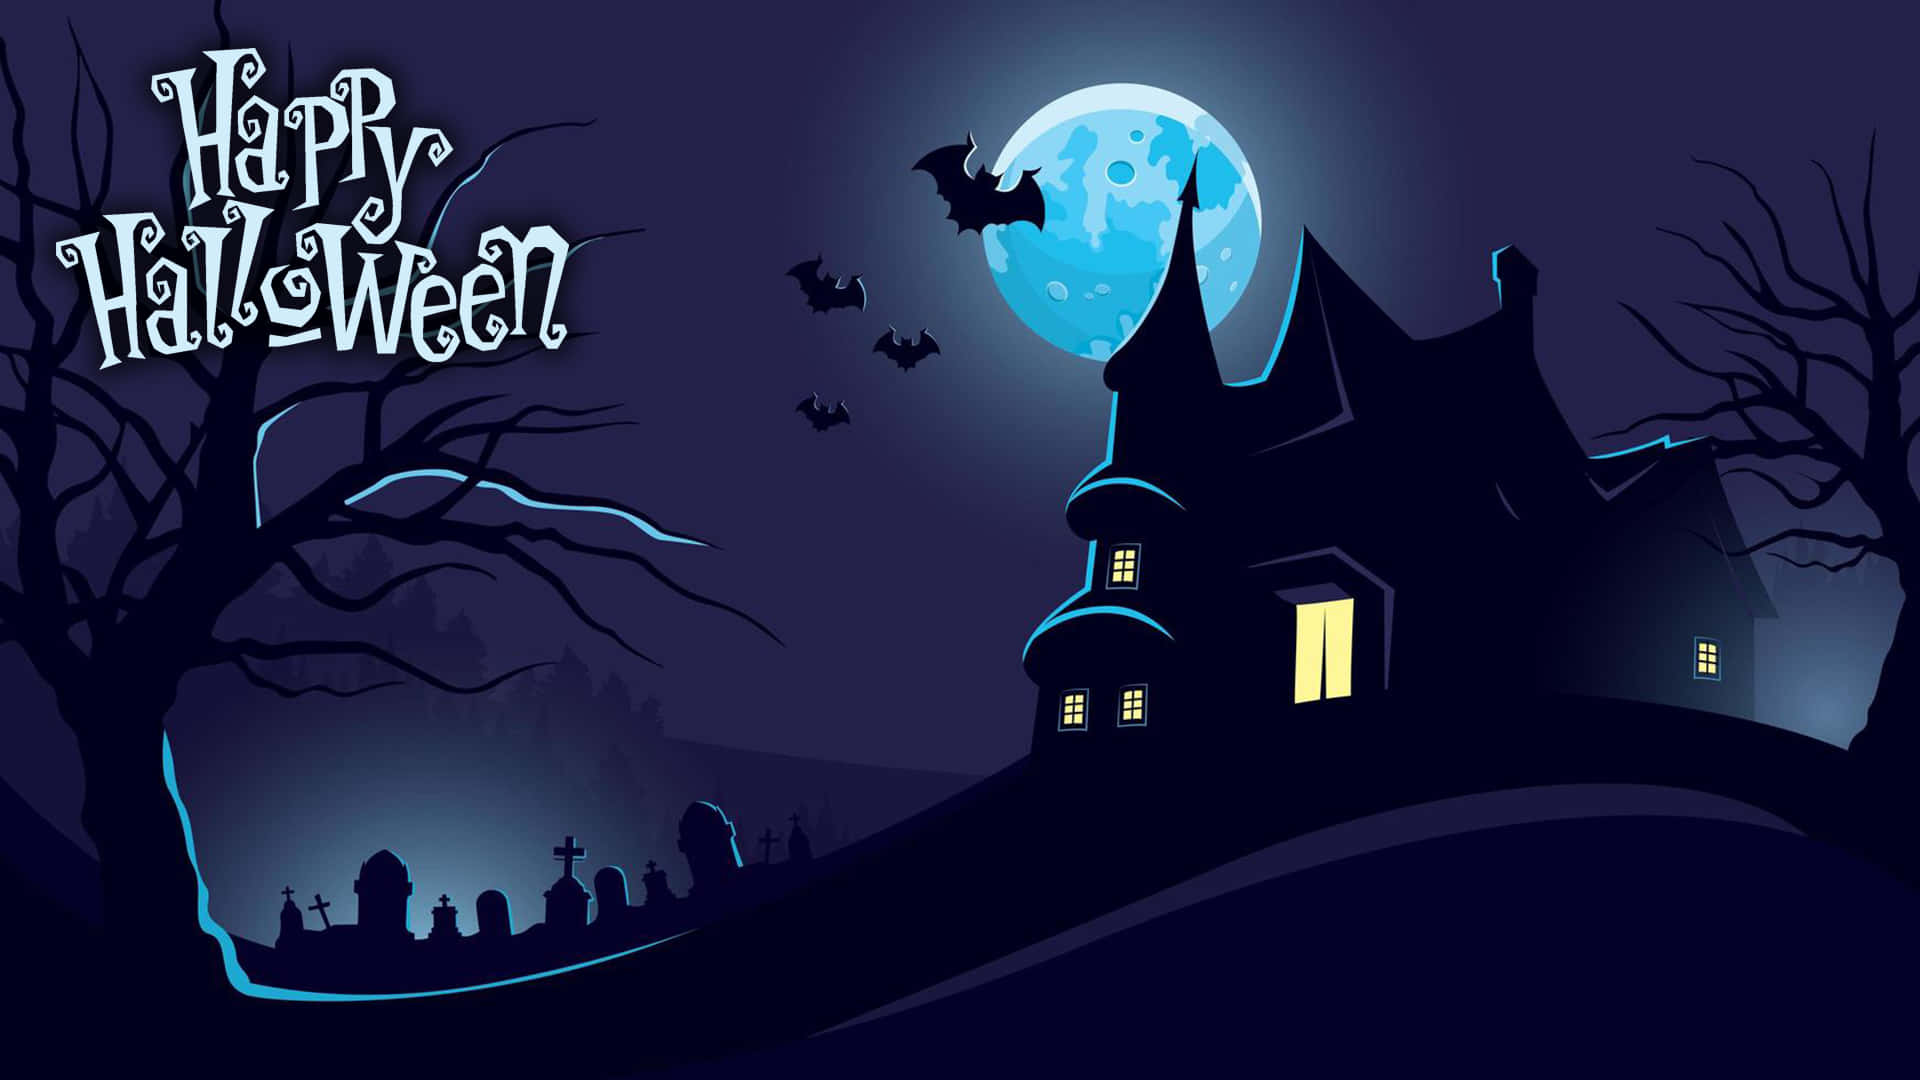 Horror Castle With Grave Halloween Zoom Background 1920 x 1080 Background